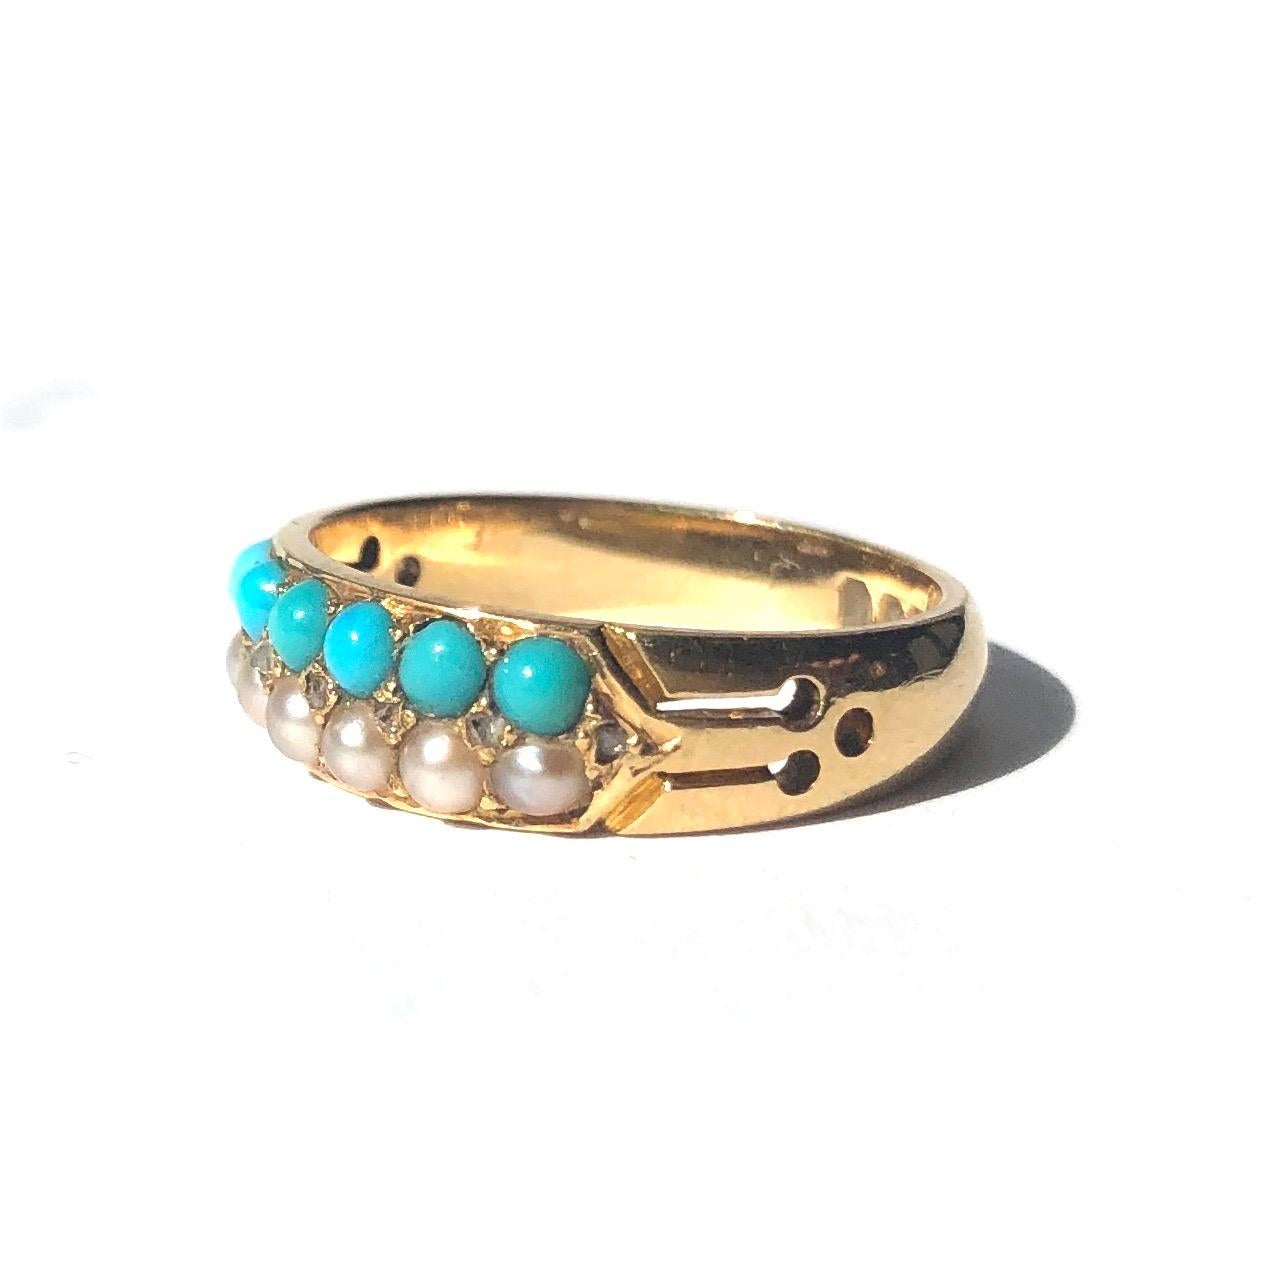 The pop of the turquoise next to the 18ct gold and pearls is percent. In between the gorgeous rows of turquoise and pearls is a sparkling row of rose cut diamonds. The shoulders have line and dot cut out detail which then carry on to the smooth